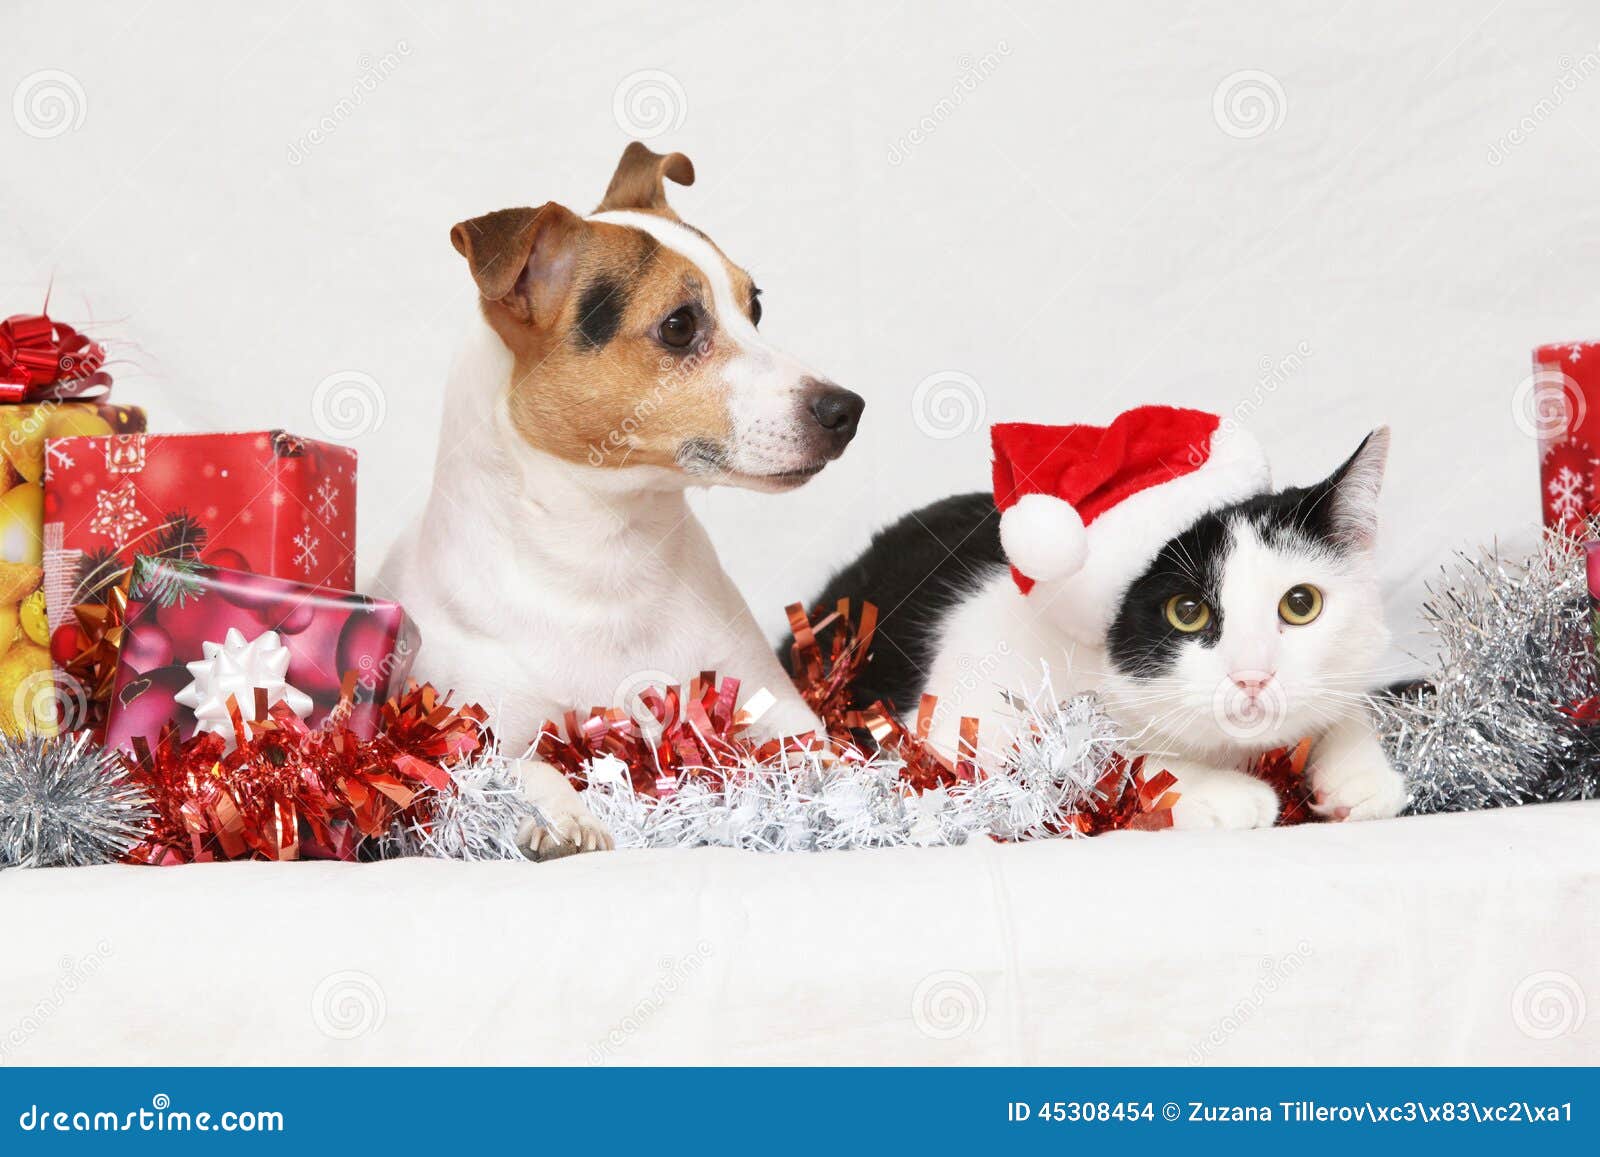 christmas jack rusell terrier with a cat